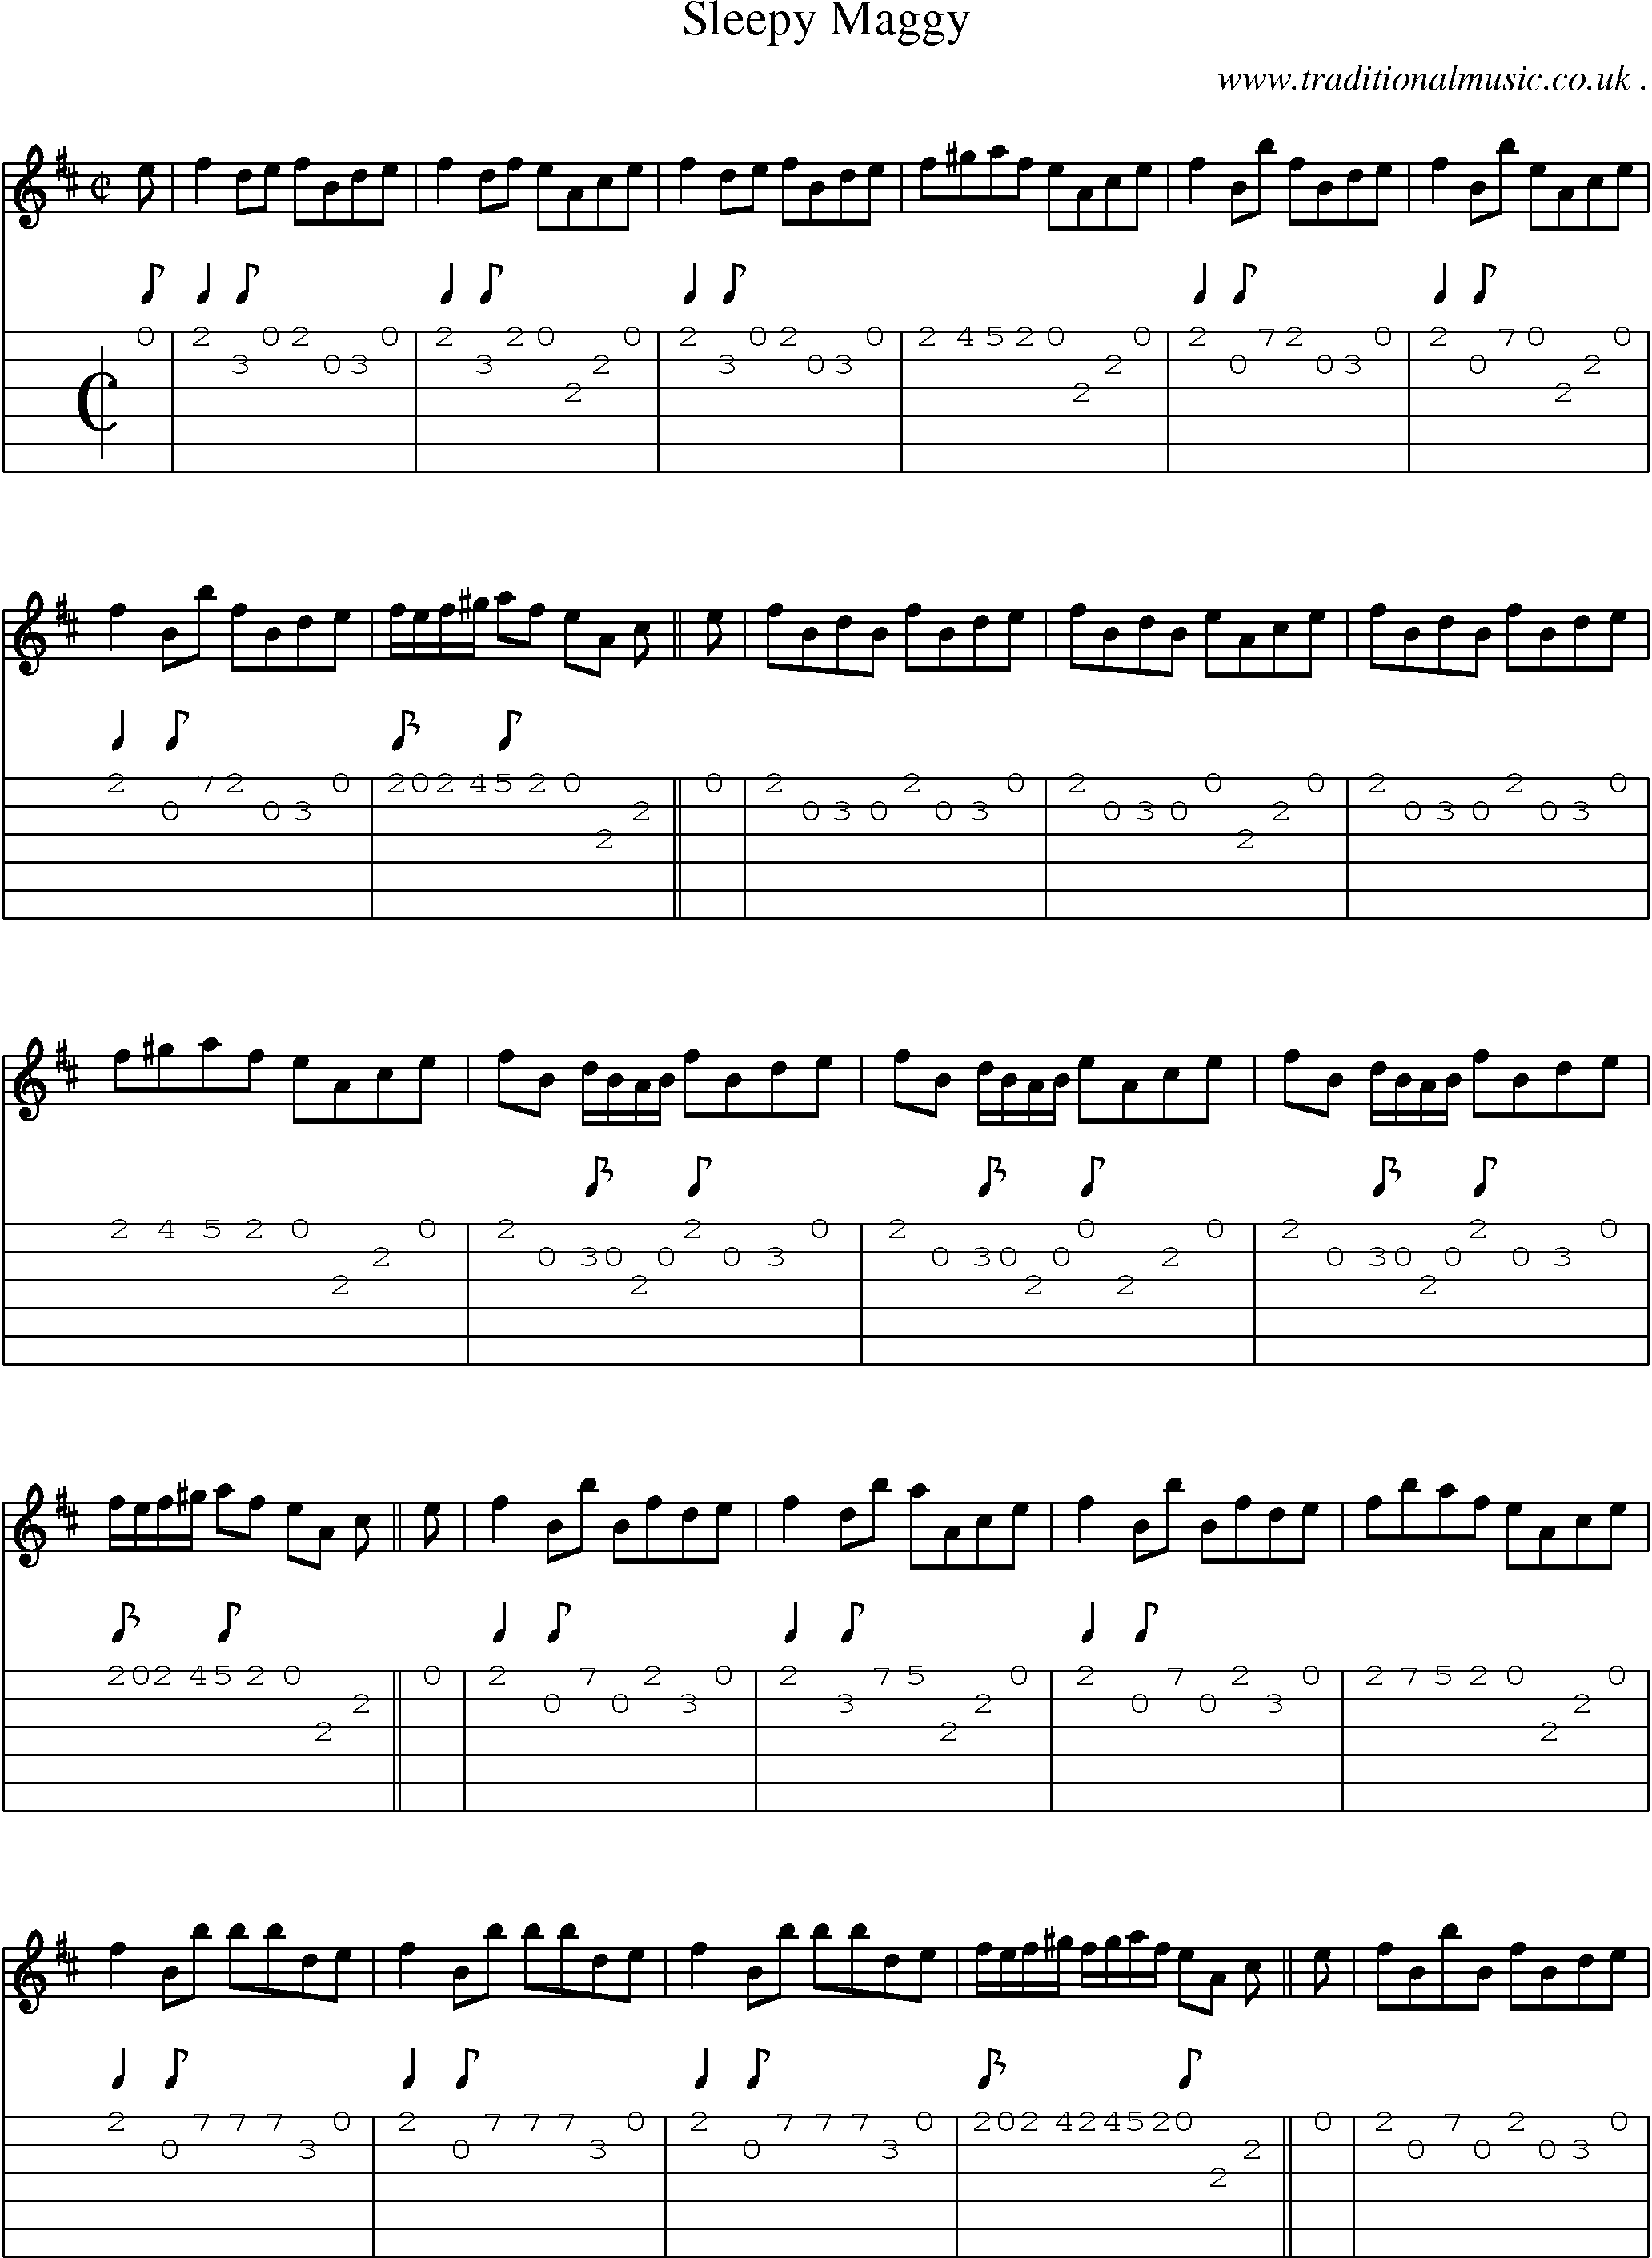 Sheet-music  score, Chords and Guitar Tabs for Sleepy Maggy